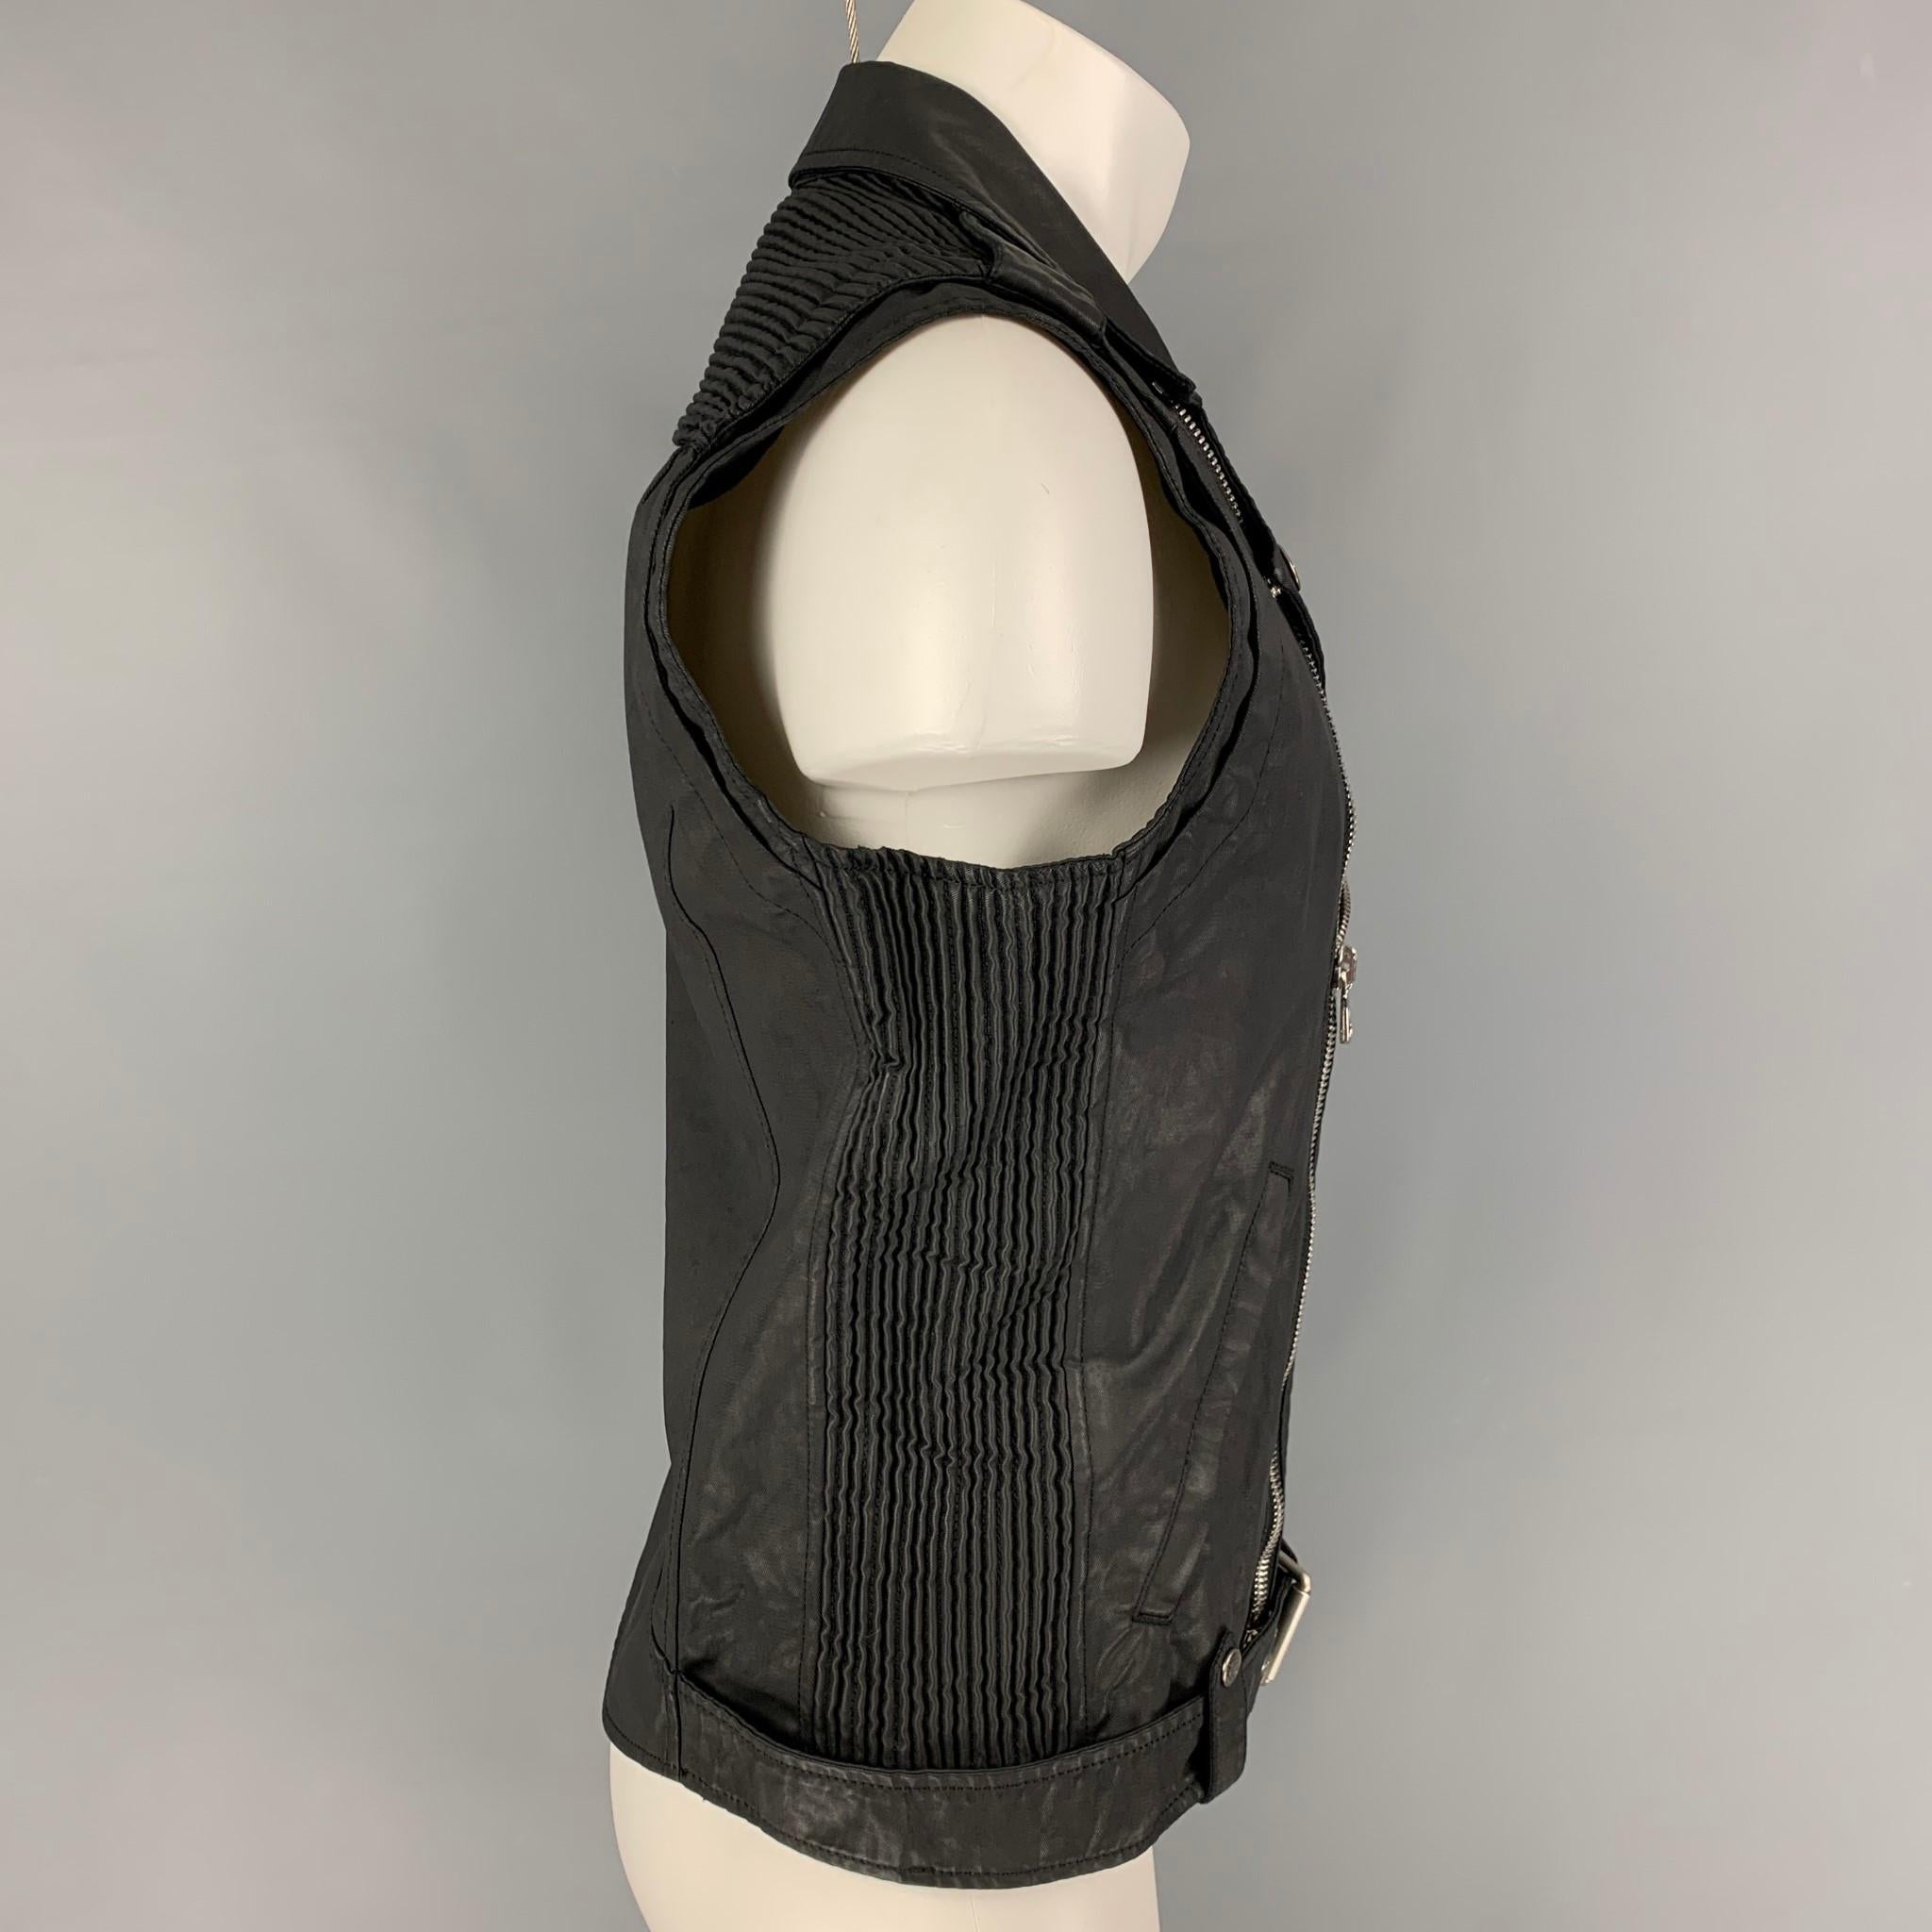 PIERRE BALMAIN vest comes in a black coated cotton / polyurethane featuring a biker style, ribbed panels, silver tone hardware, belt detail, zipper pockets, and a zip up closure. Made in Italy.

New With Tags. 
Marked: